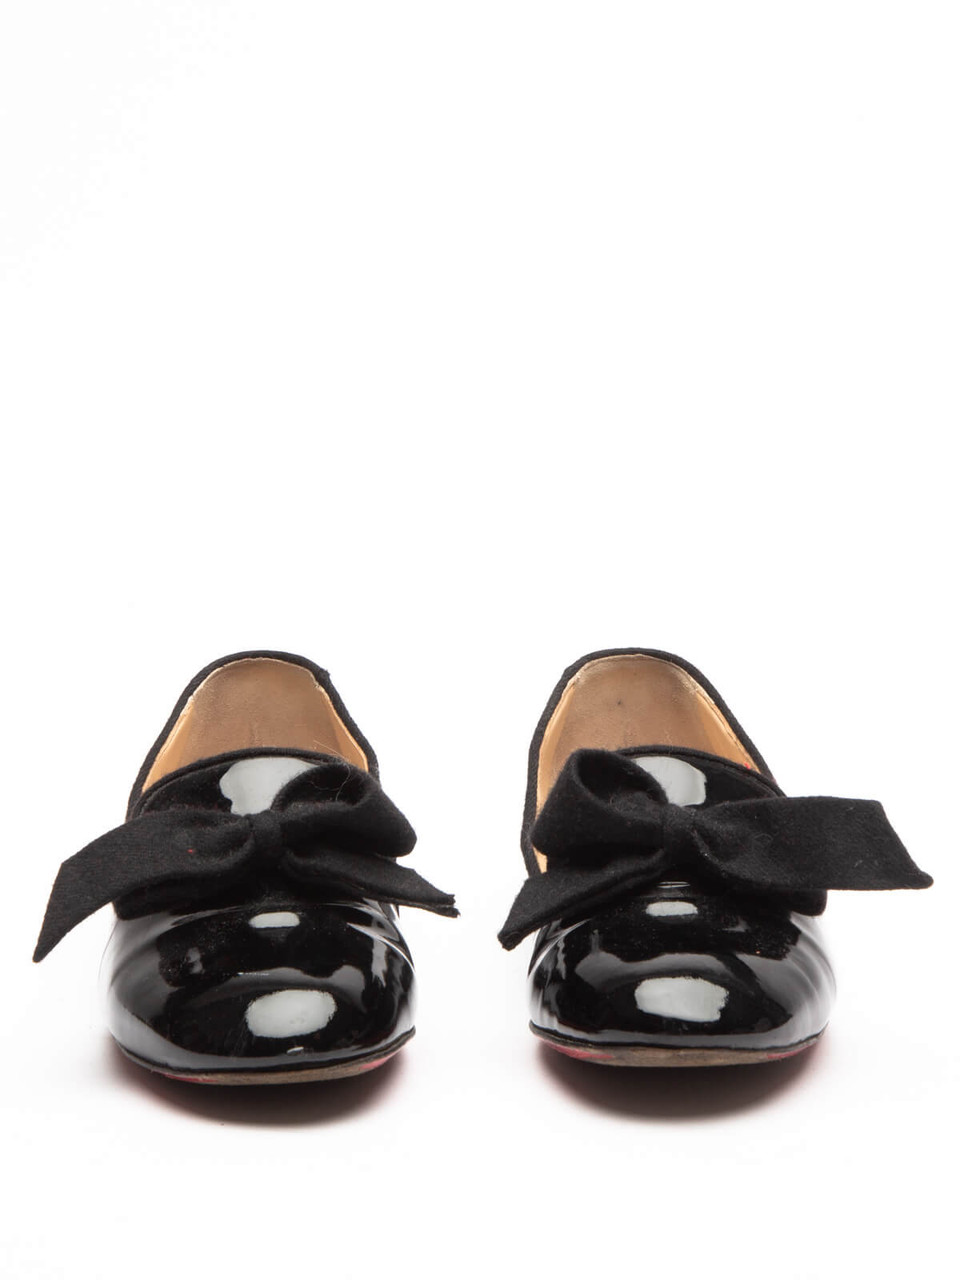 Christian Louboutin Gine Bow Slipper Black Patent Leather